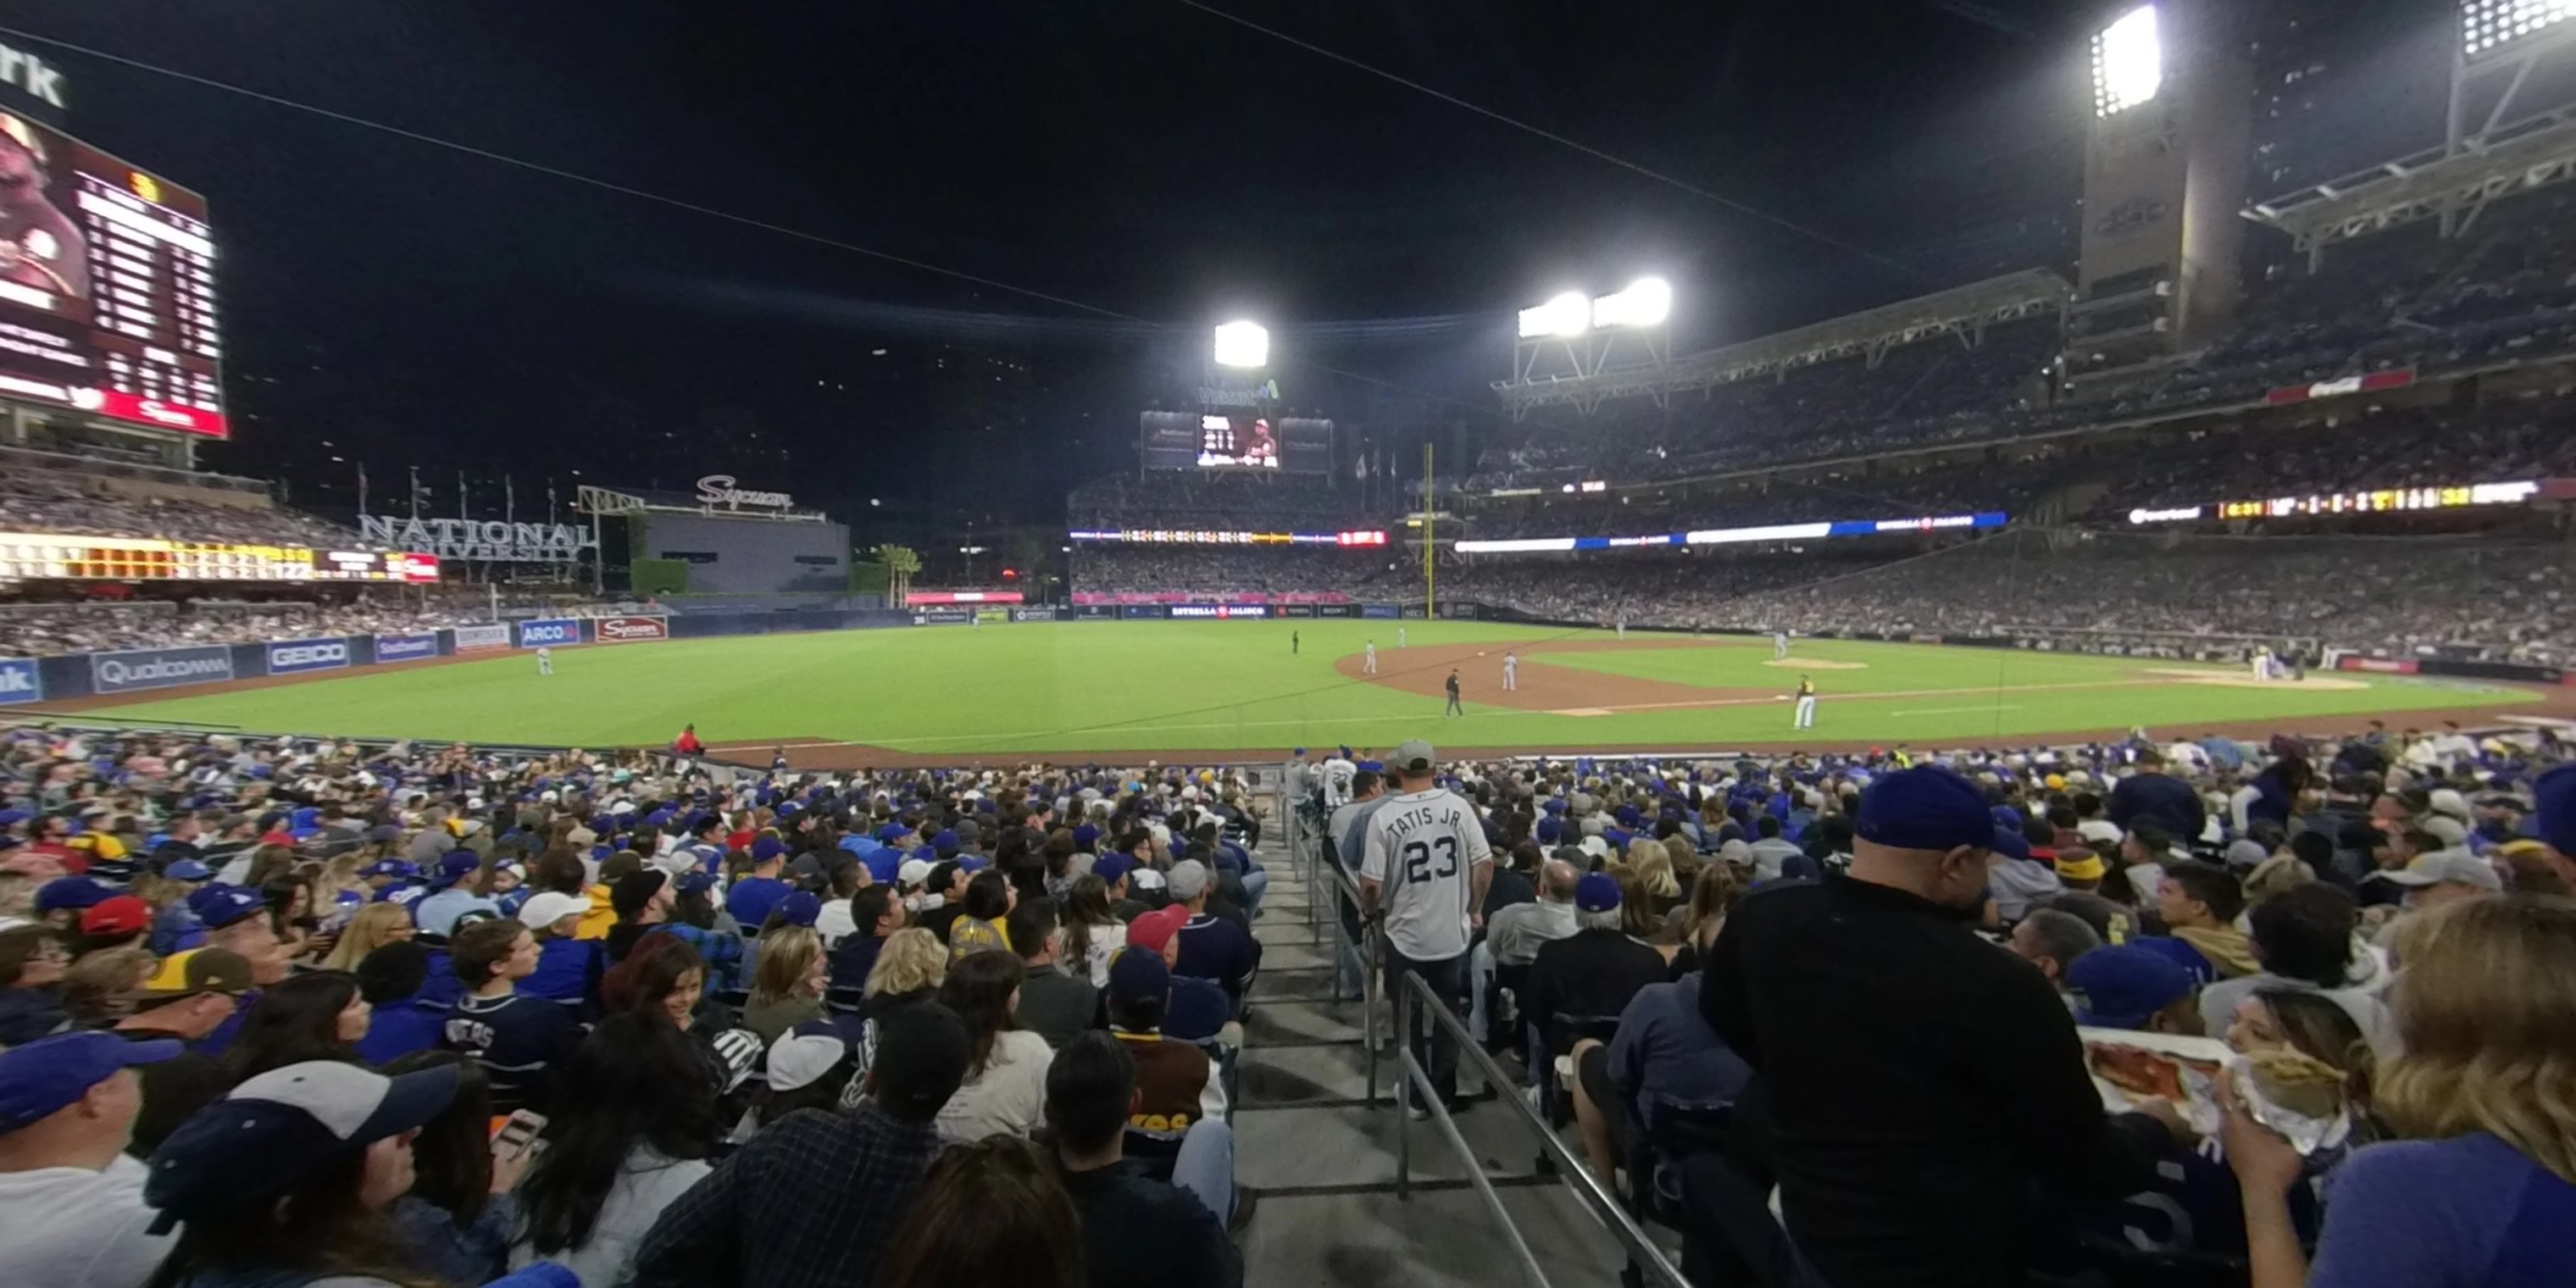 section 114 panoramic seat view  for baseball - petco park